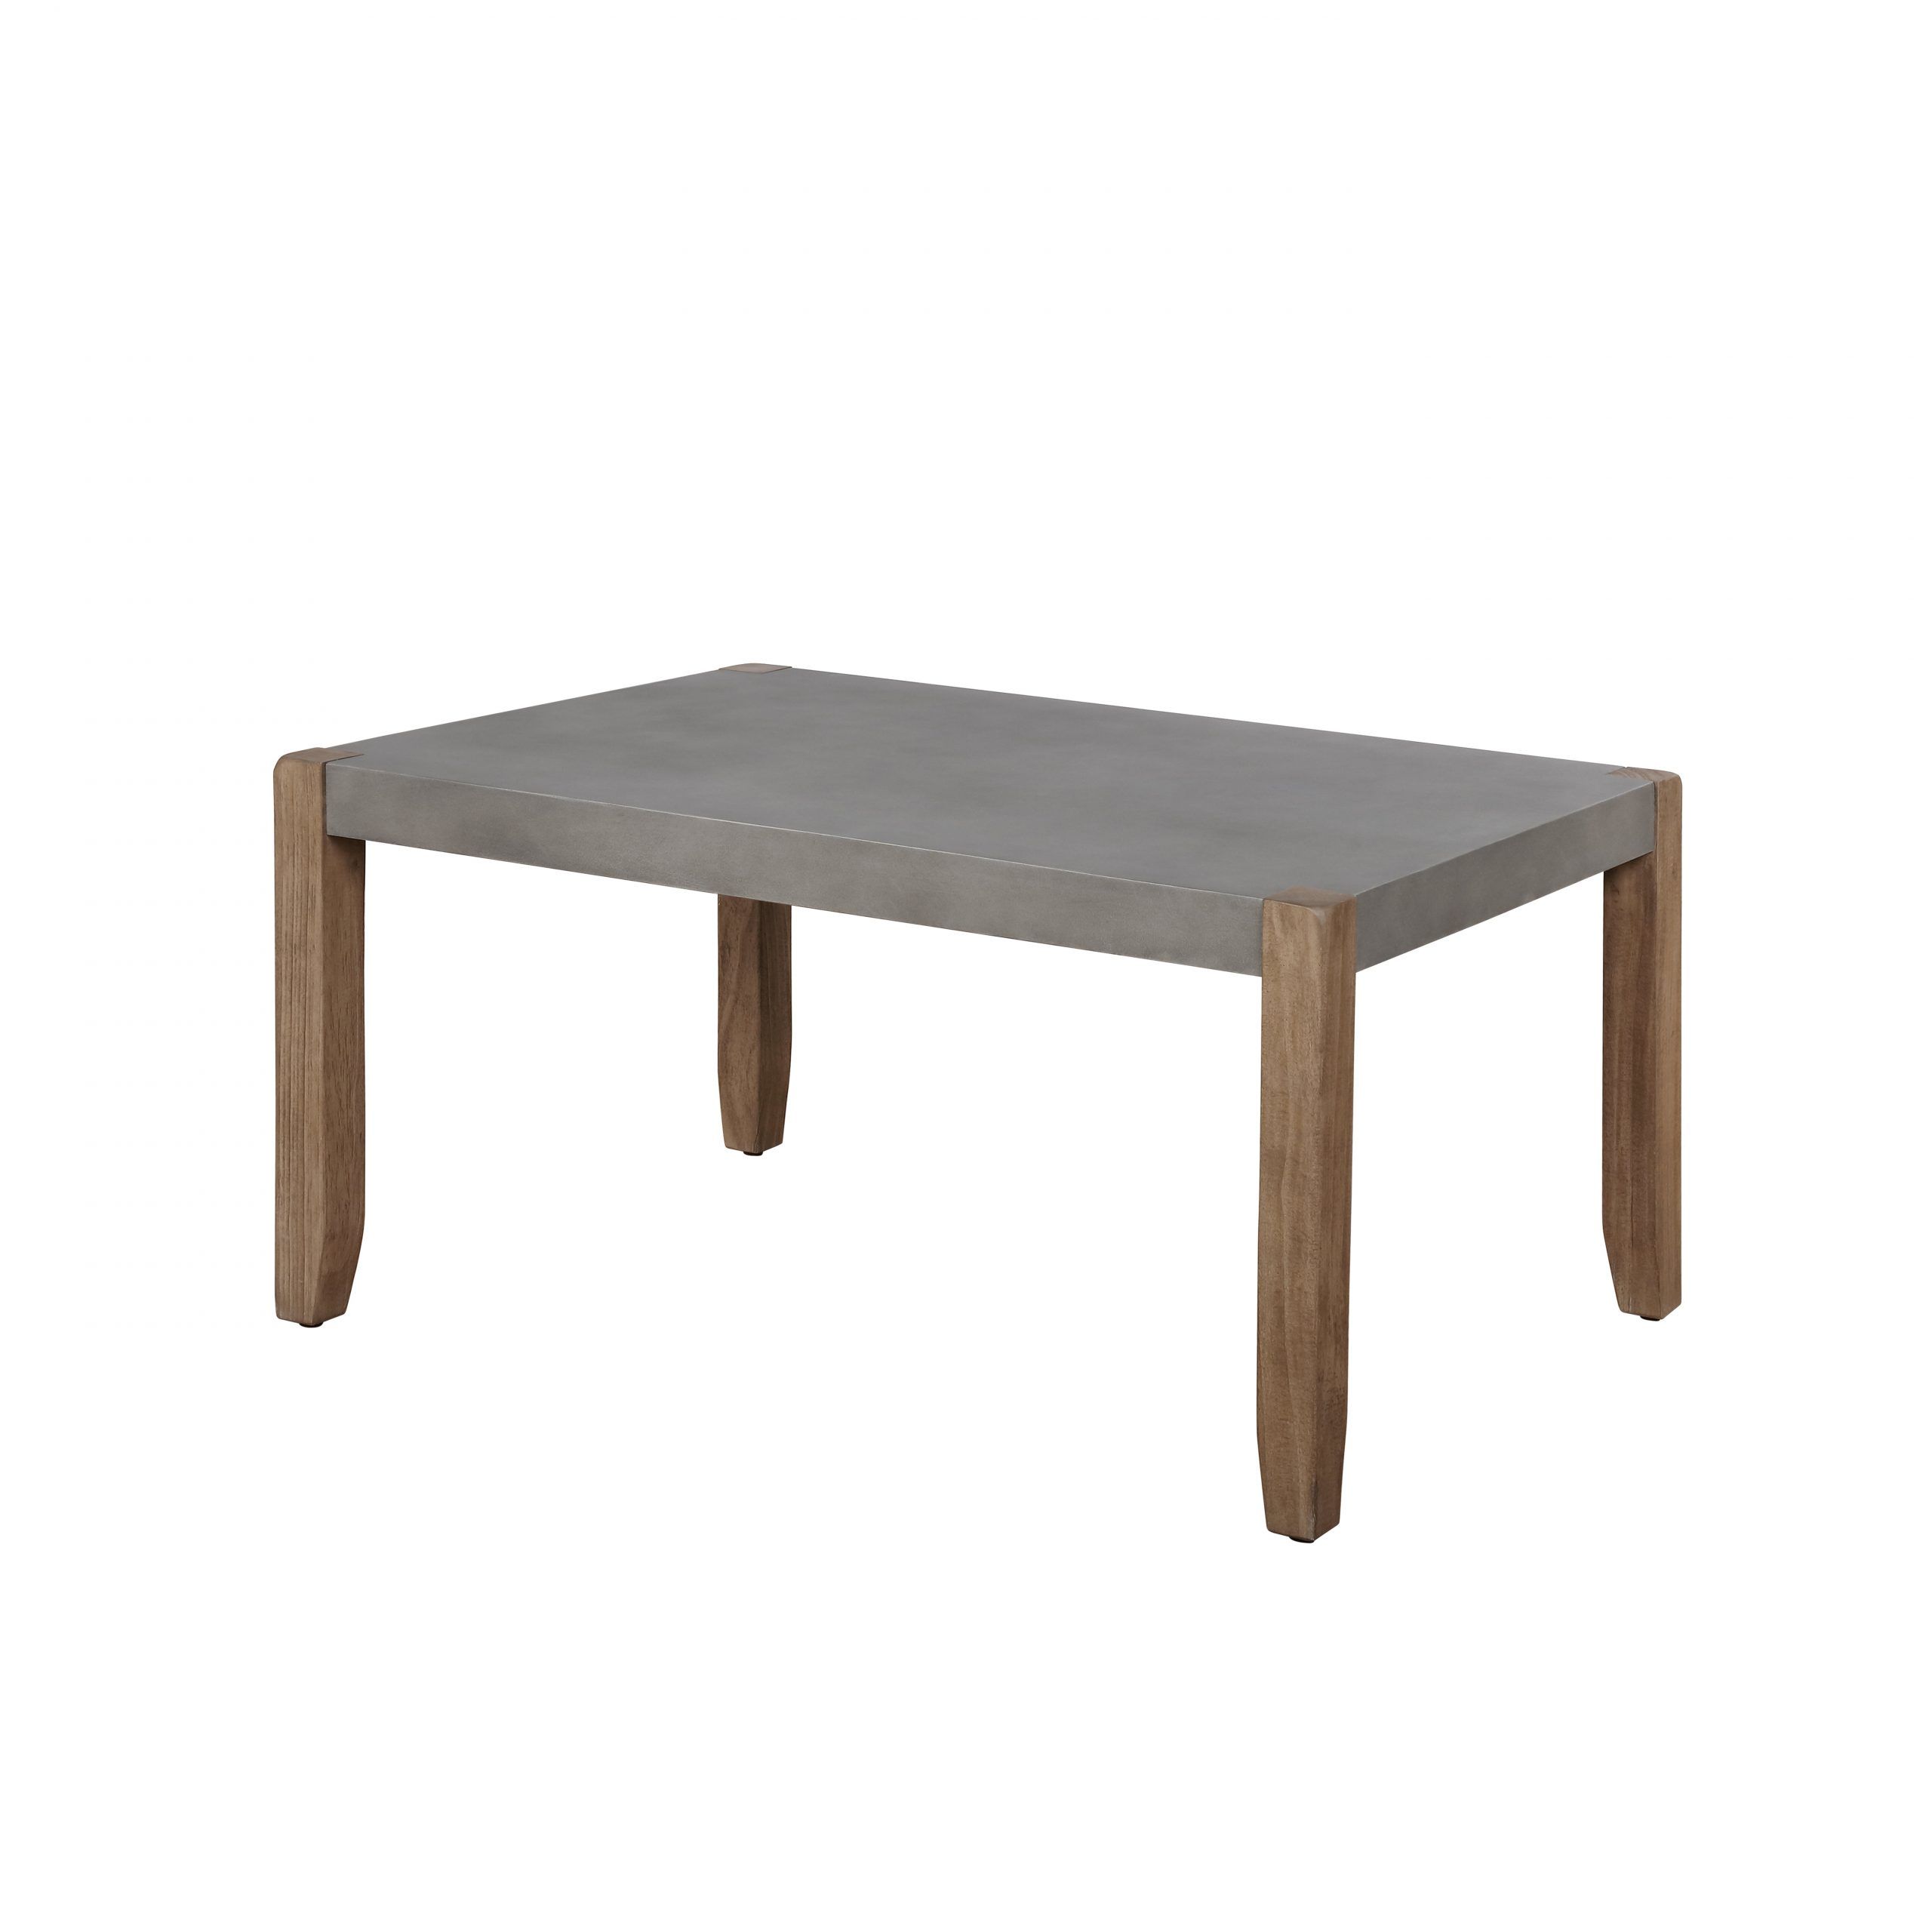 2020 Industrial Faux Wood Coffee Tables With Alaterre Newport 36"l Faux Concrete And Wood Coffee Table – Walmart (View 7 of 20)